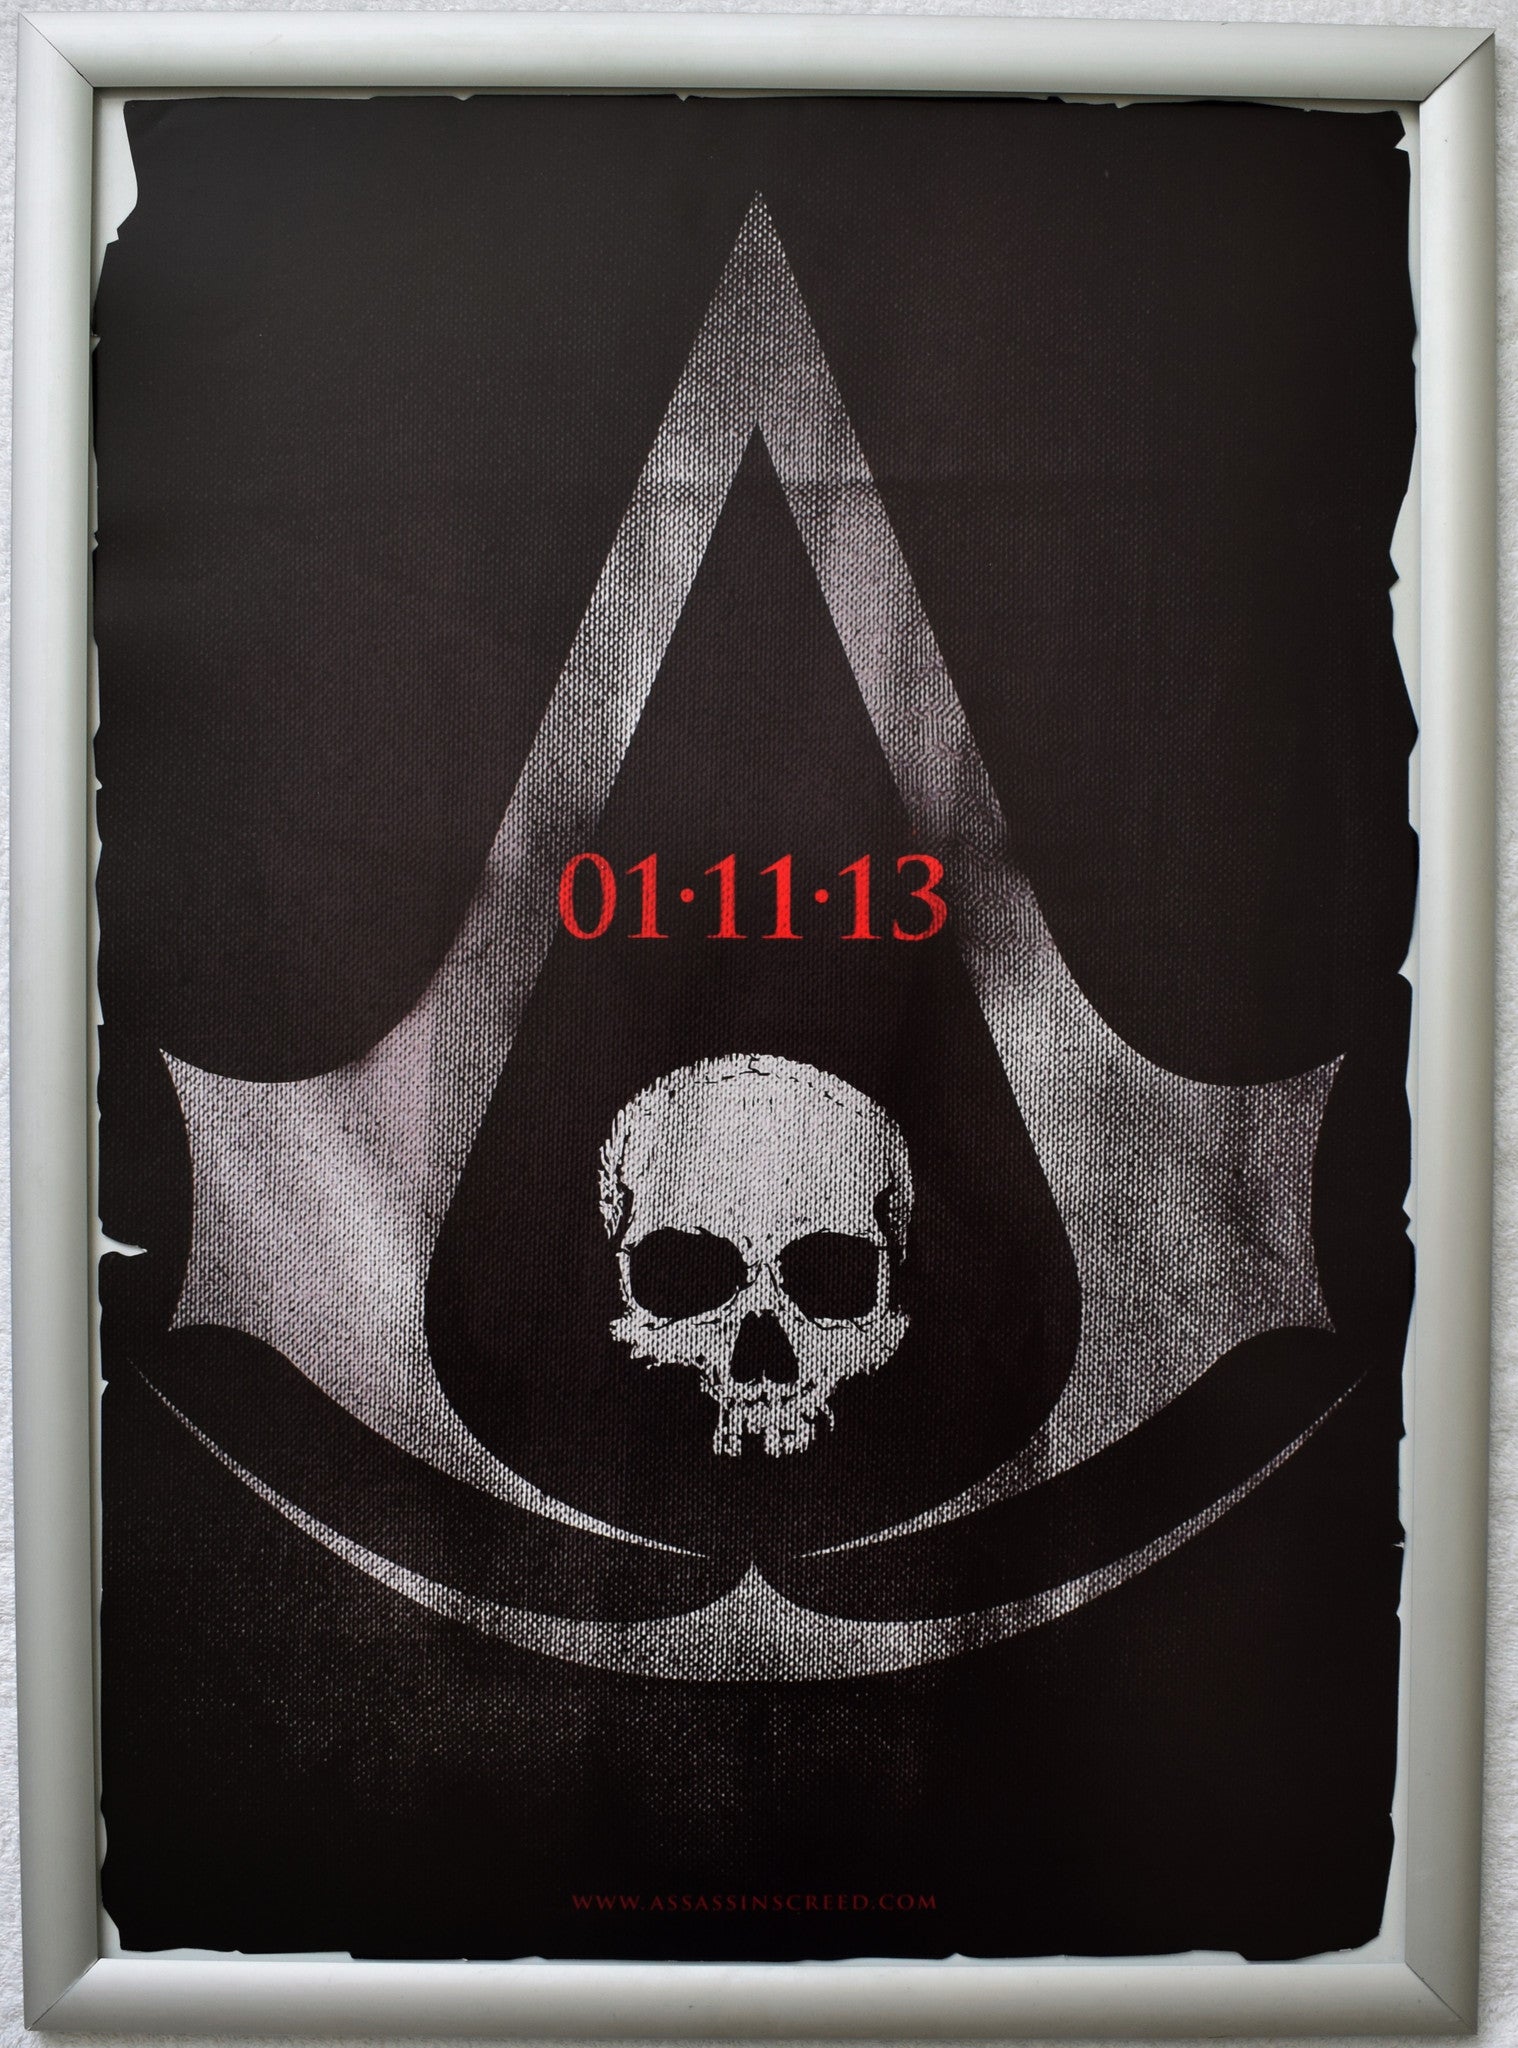 Assassin's Creed Black Flag (A2) Promotional Poster #2